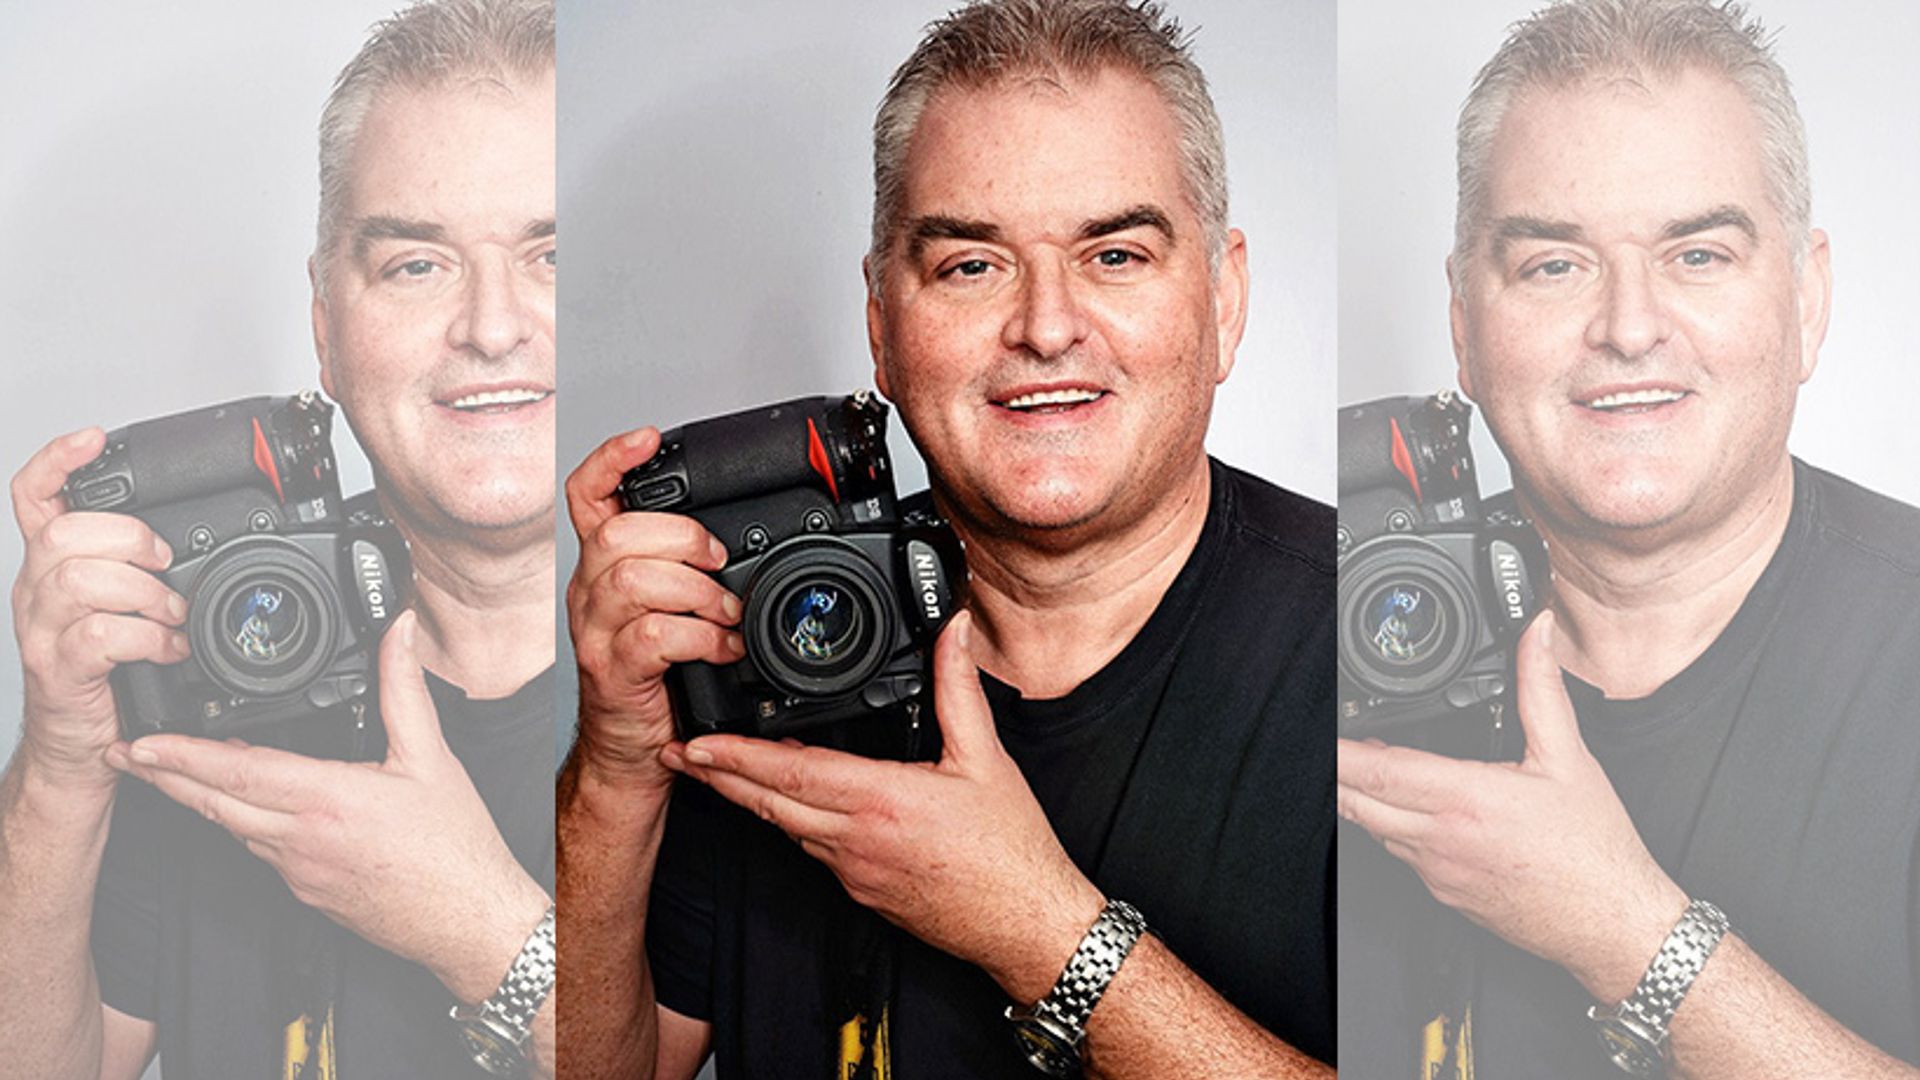 Here's how you can win a photoshoot with celebrity photographer Dave Hogan